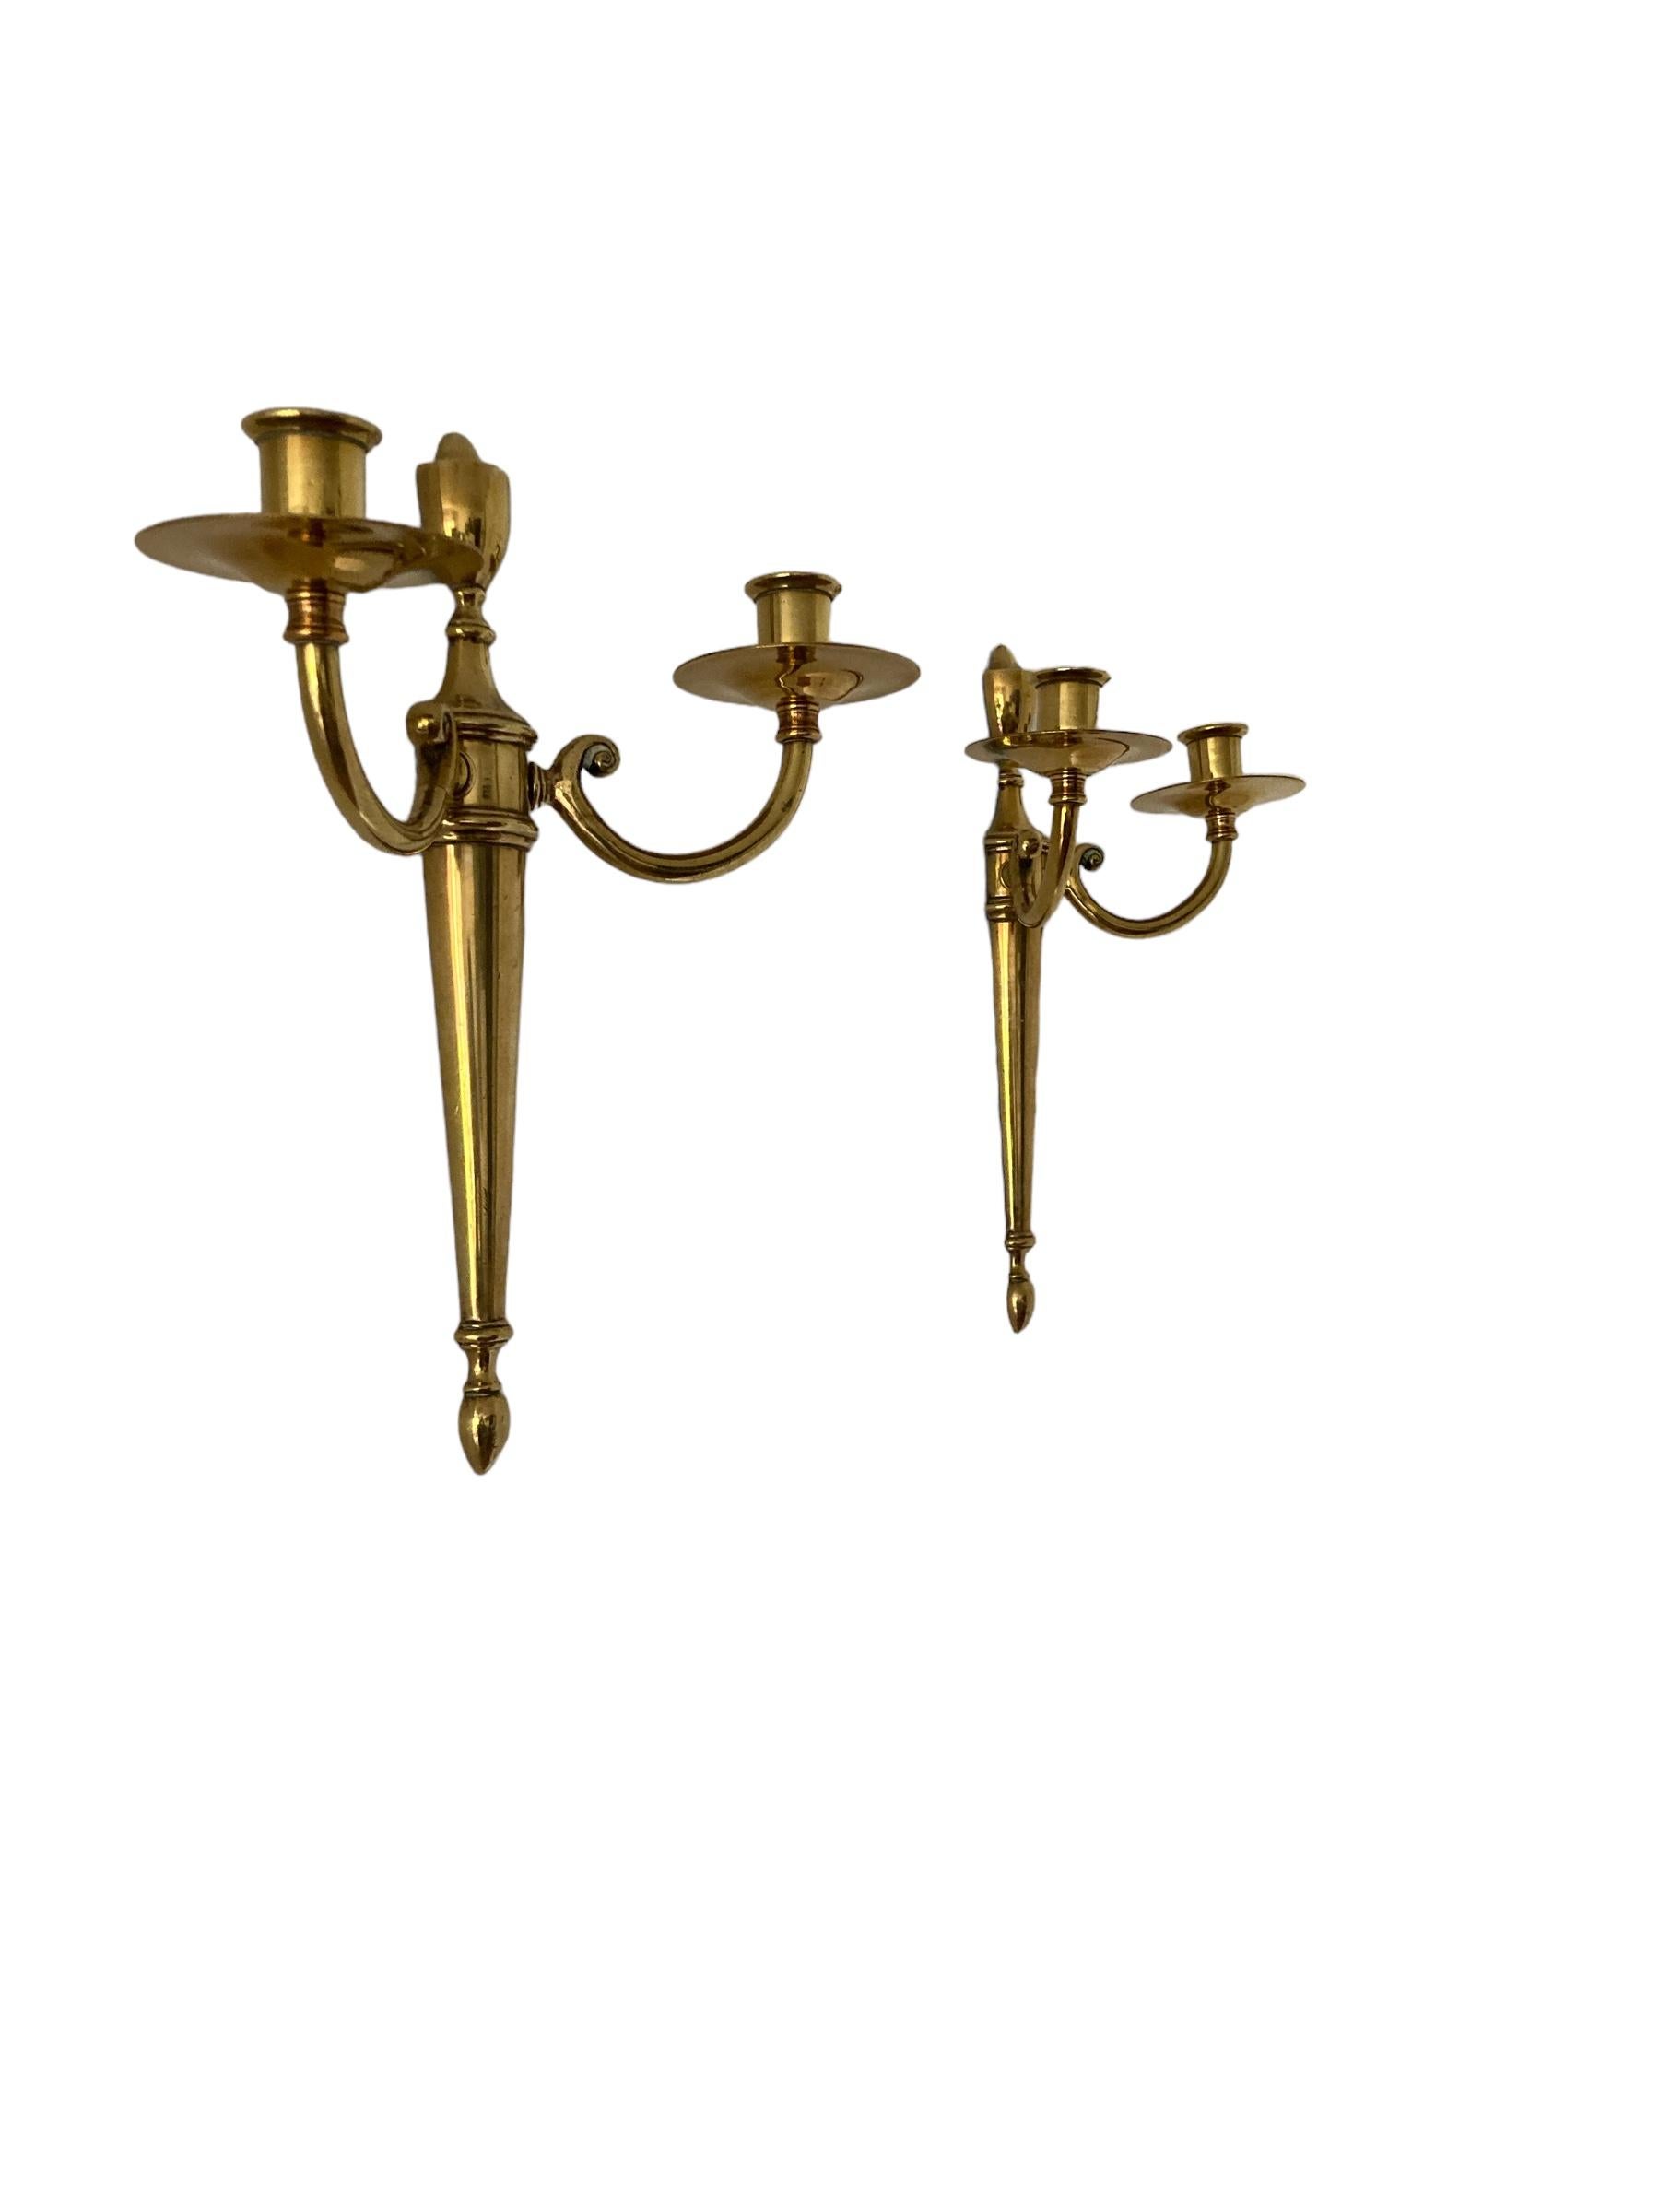 20th Century A Pair of Vintage Brass Candle Holder Wall Sconces For Sale